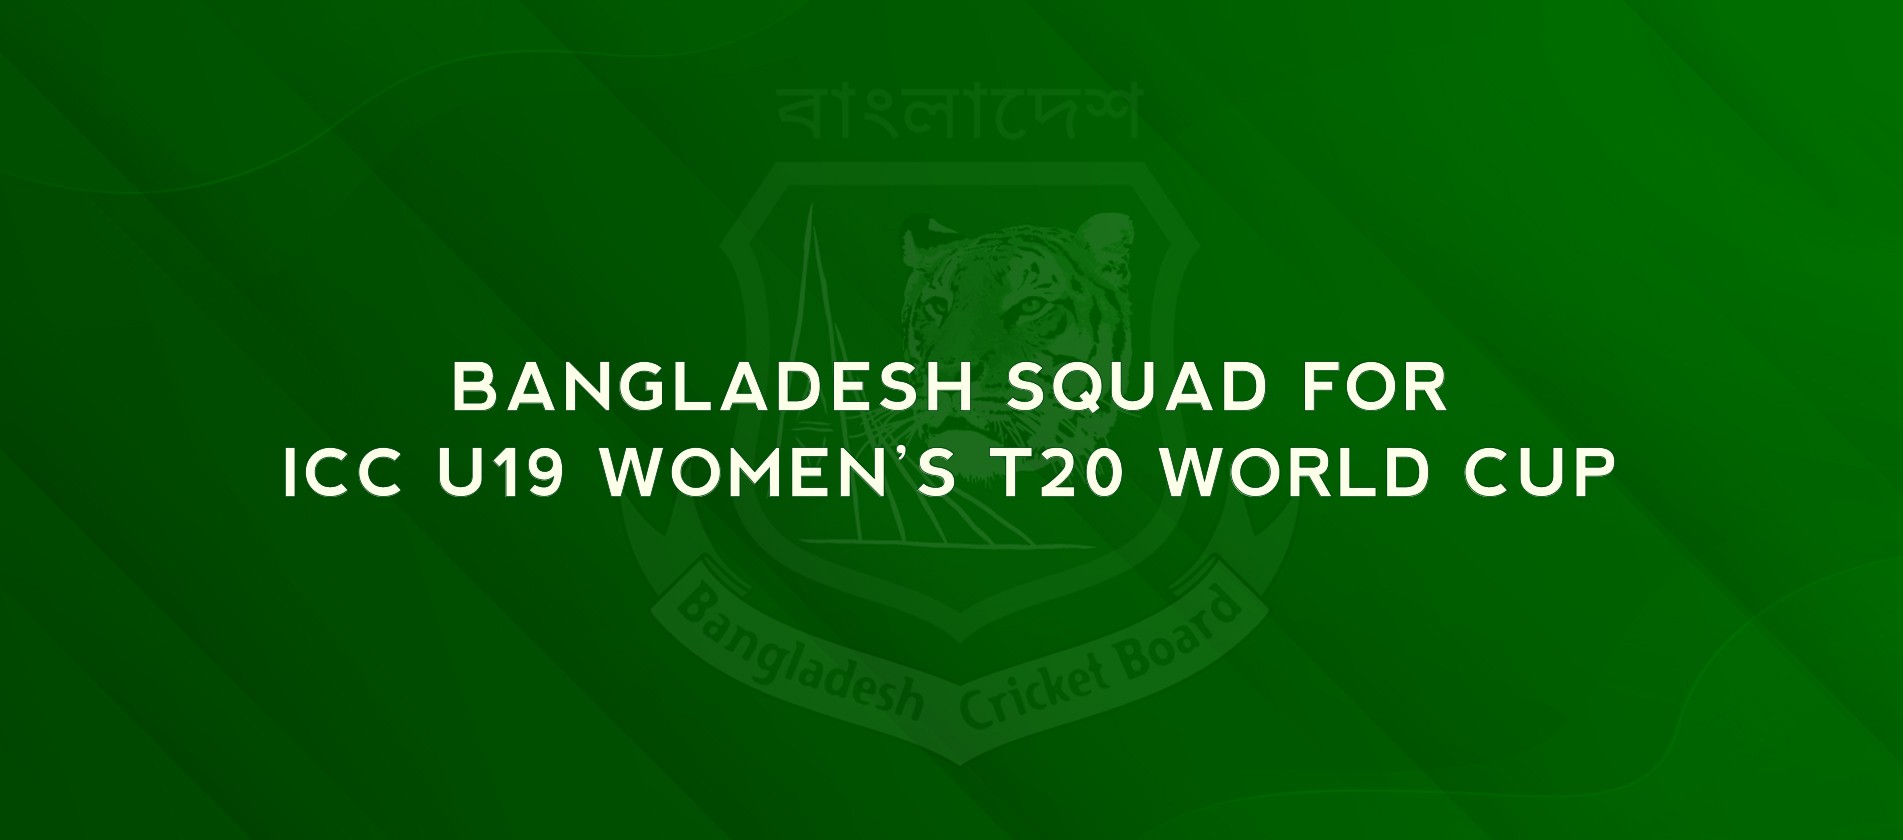 Bangladesh squad for ICC U19 Women’s T20 World Cup announced